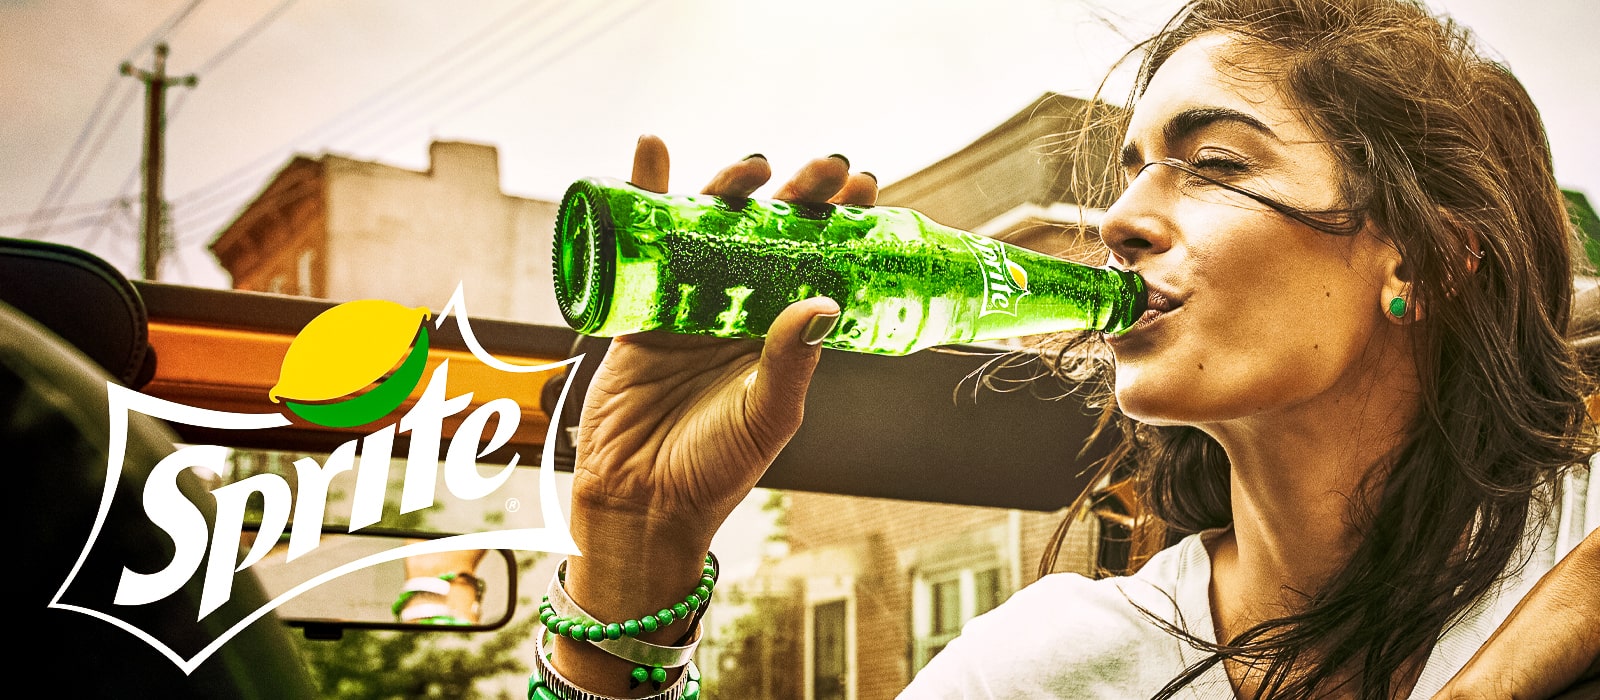 Woman drinking a bottle of Sprite with Sprite's logo on the side of the image